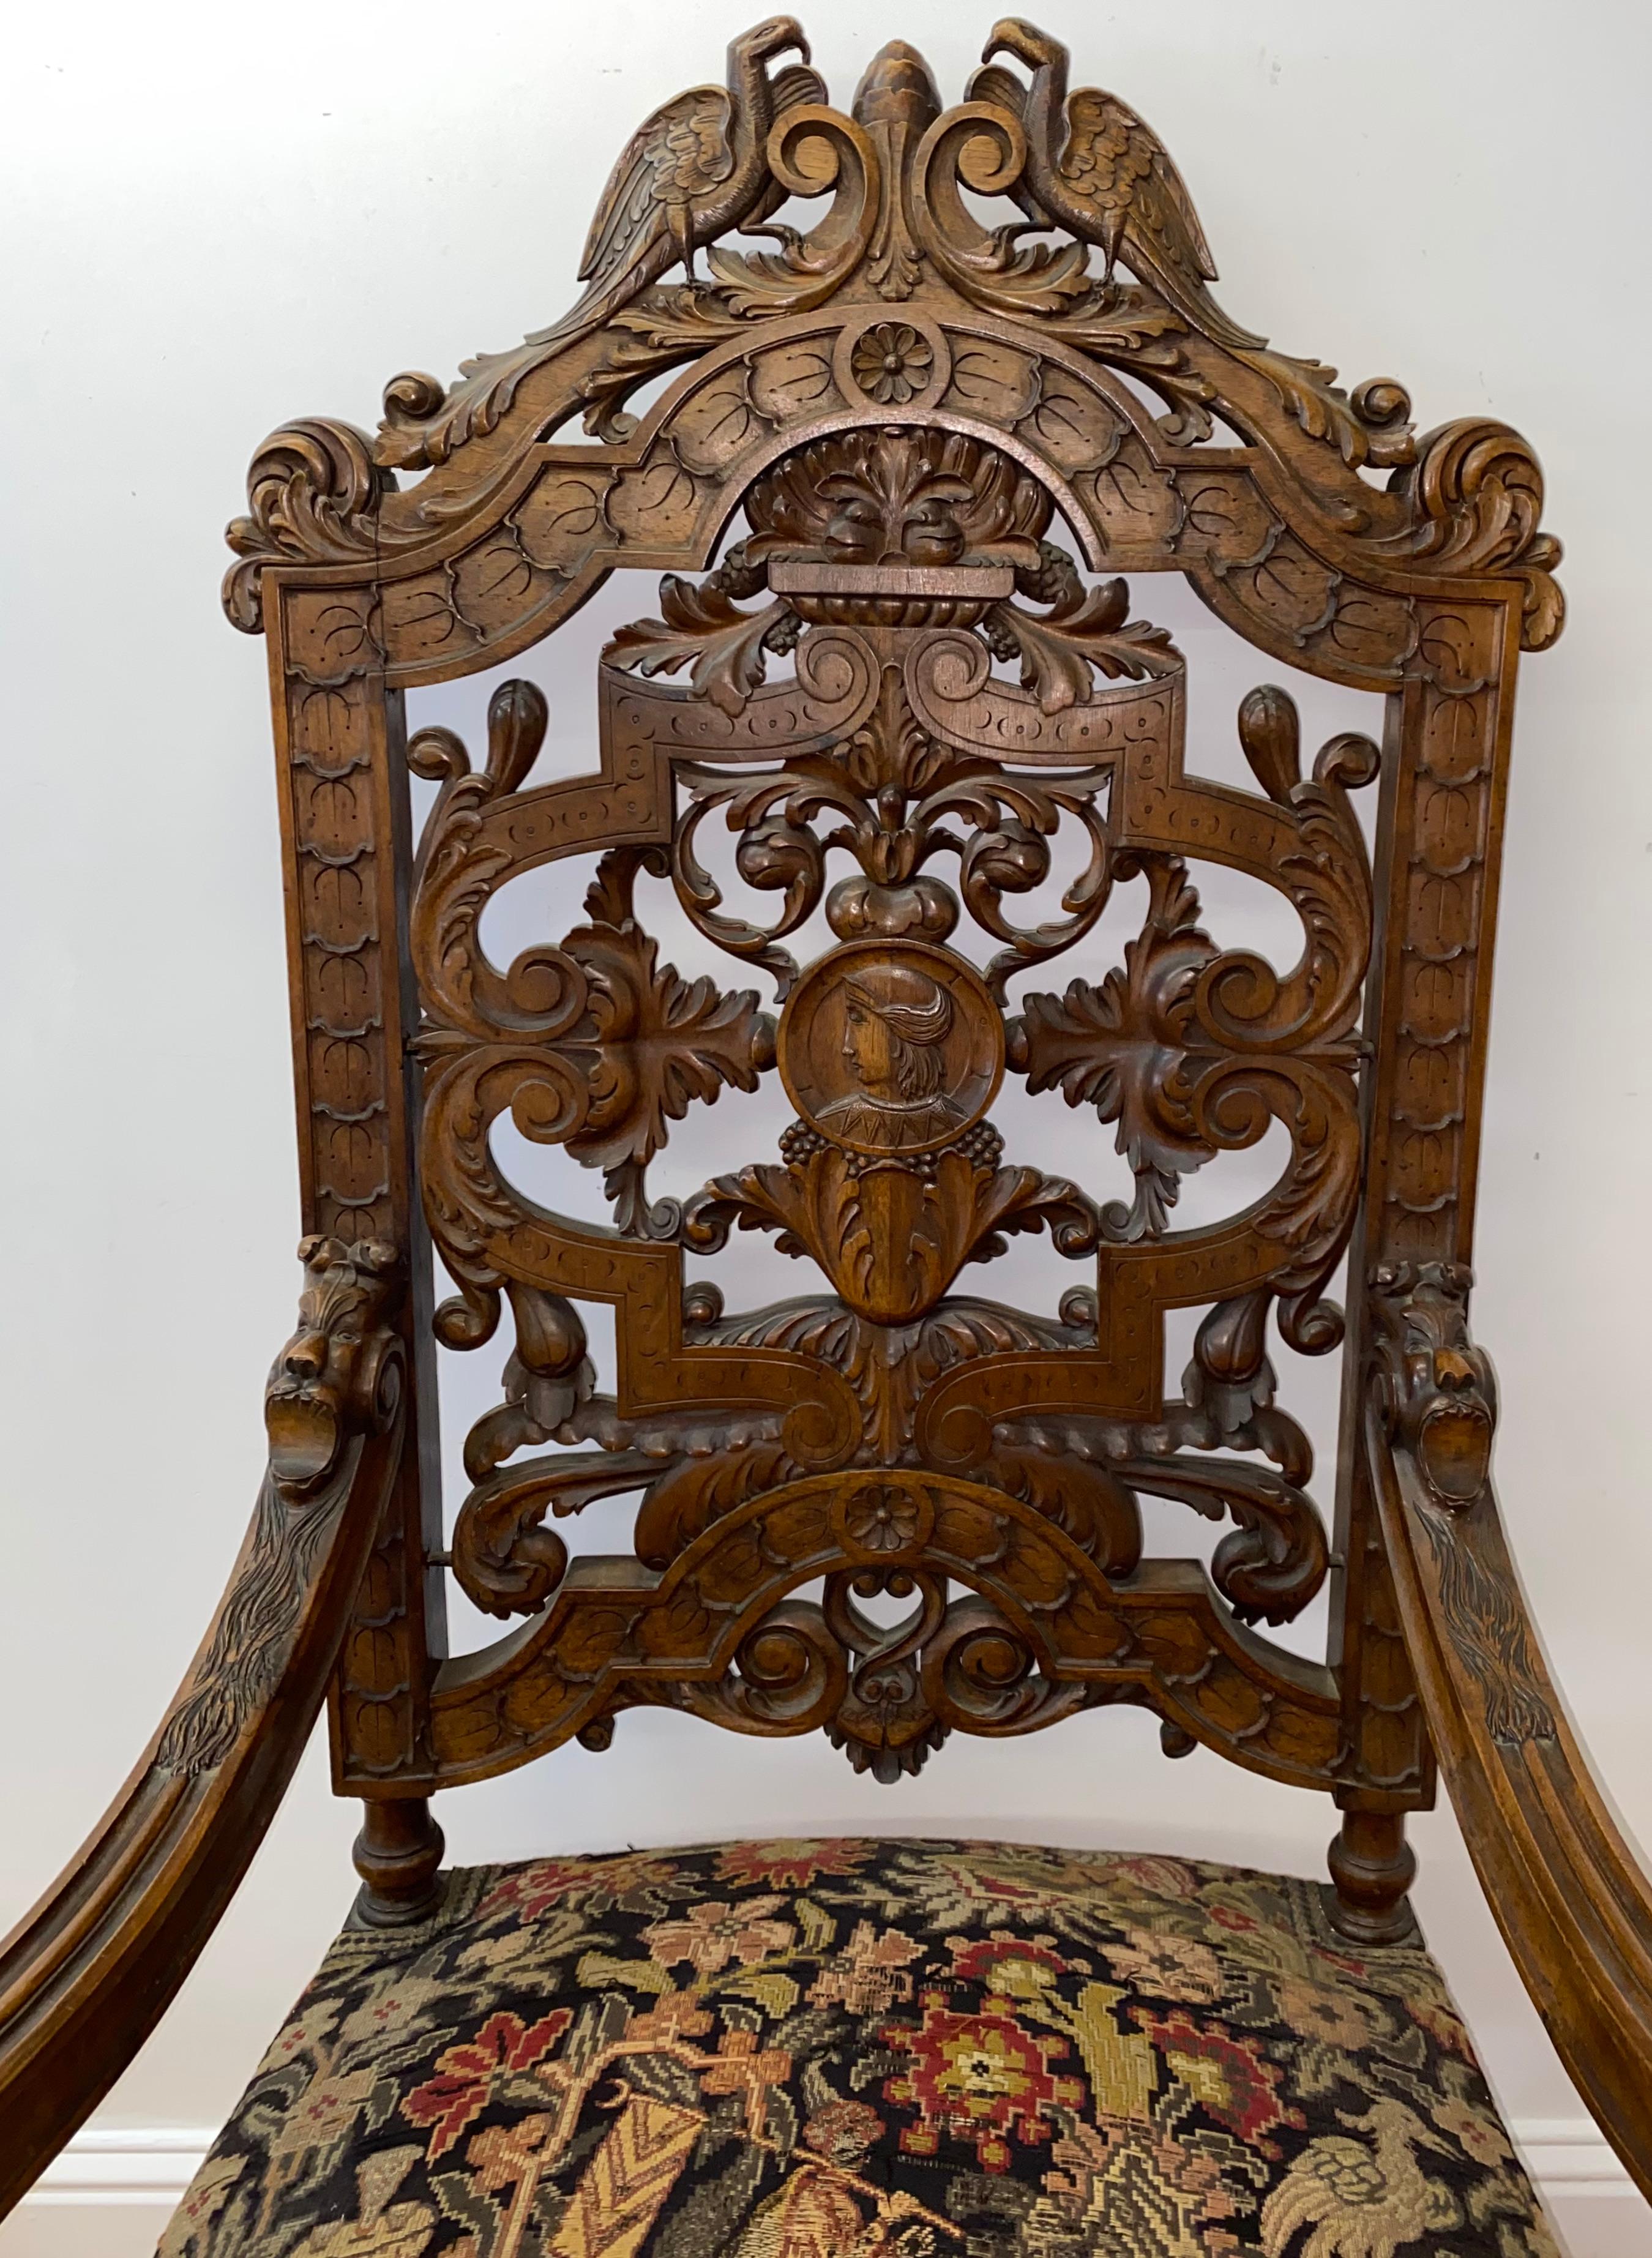 19th century European carved walnut arm chair with tapestry upholstery

Outstanding hand carved walnut chair

Measures: 27.25